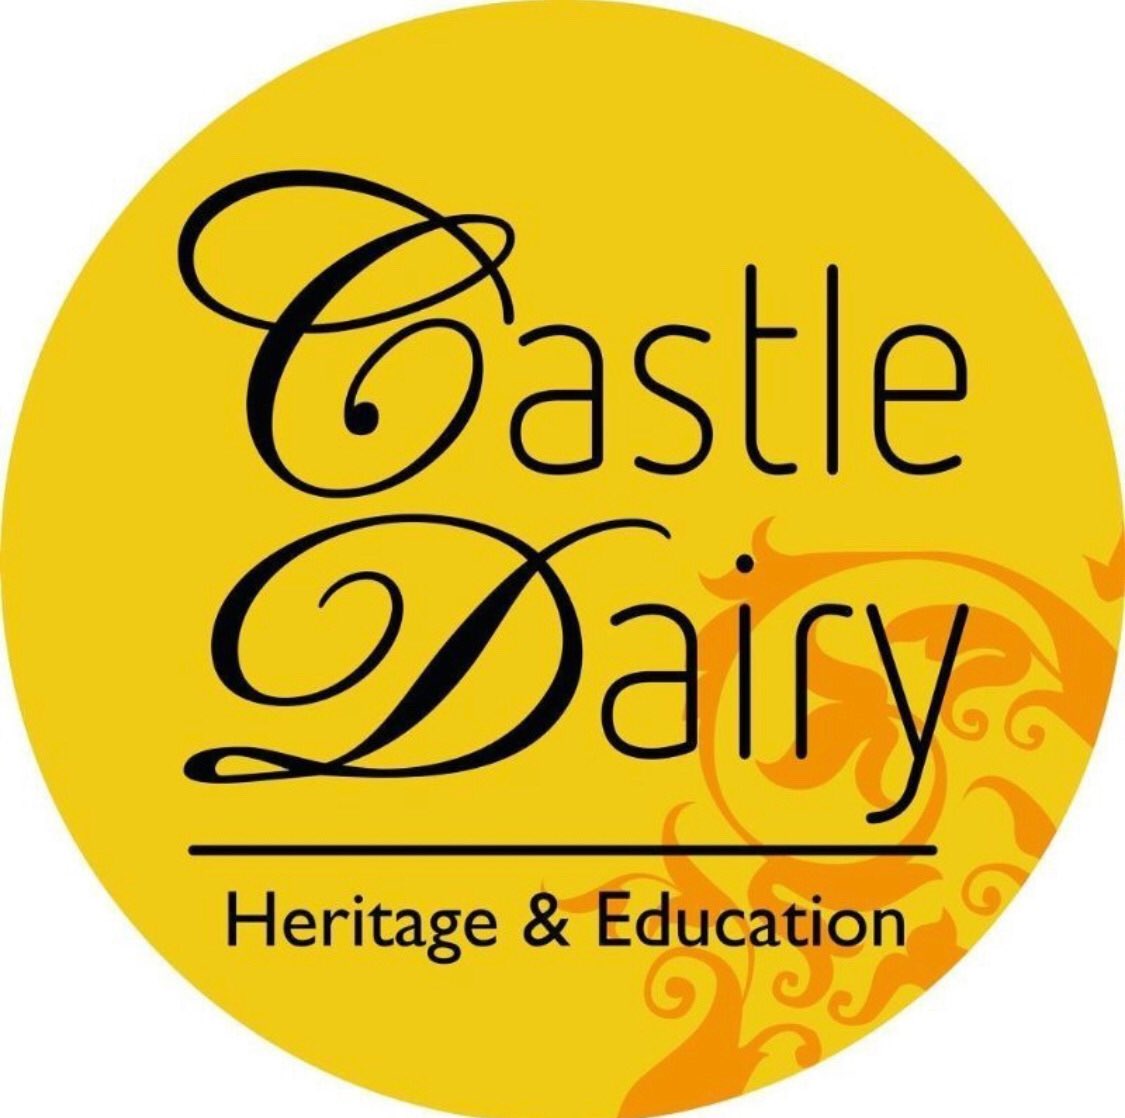 The Castle Dairy is being relaunched in ...